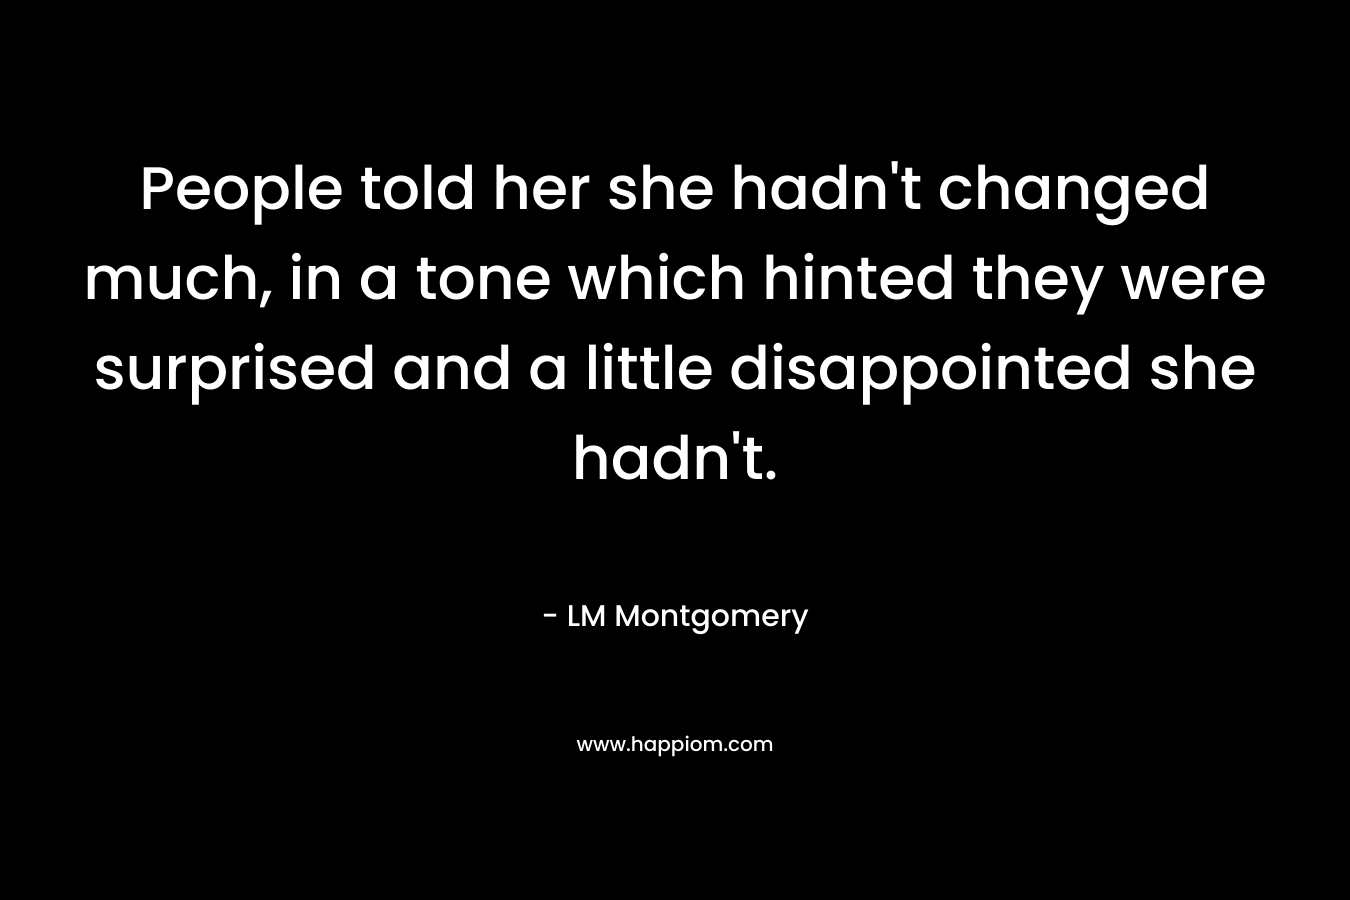 People told her she hadn’t changed much, in a tone which hinted they were surprised and a little disappointed she hadn’t. – LM Montgomery